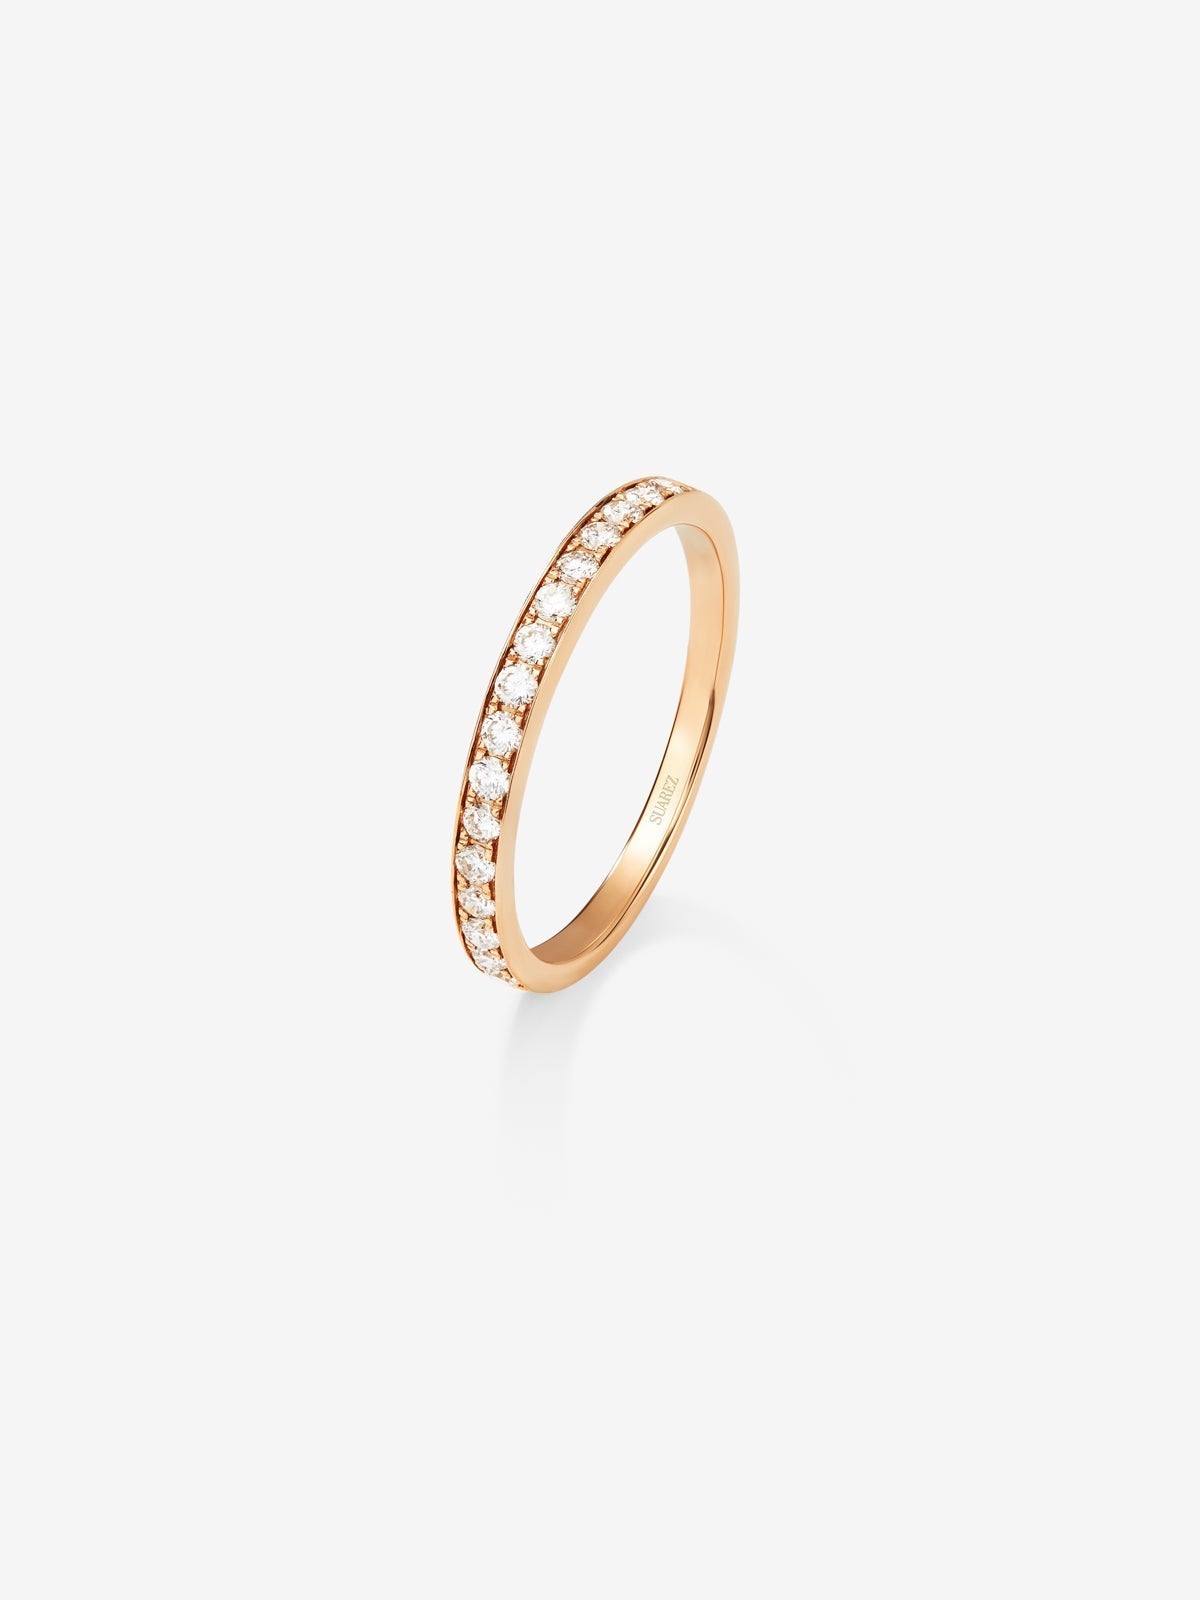 Half ring in 18K rose gold with 18 brilliant-cut diamonds with a total of 0.15 cts